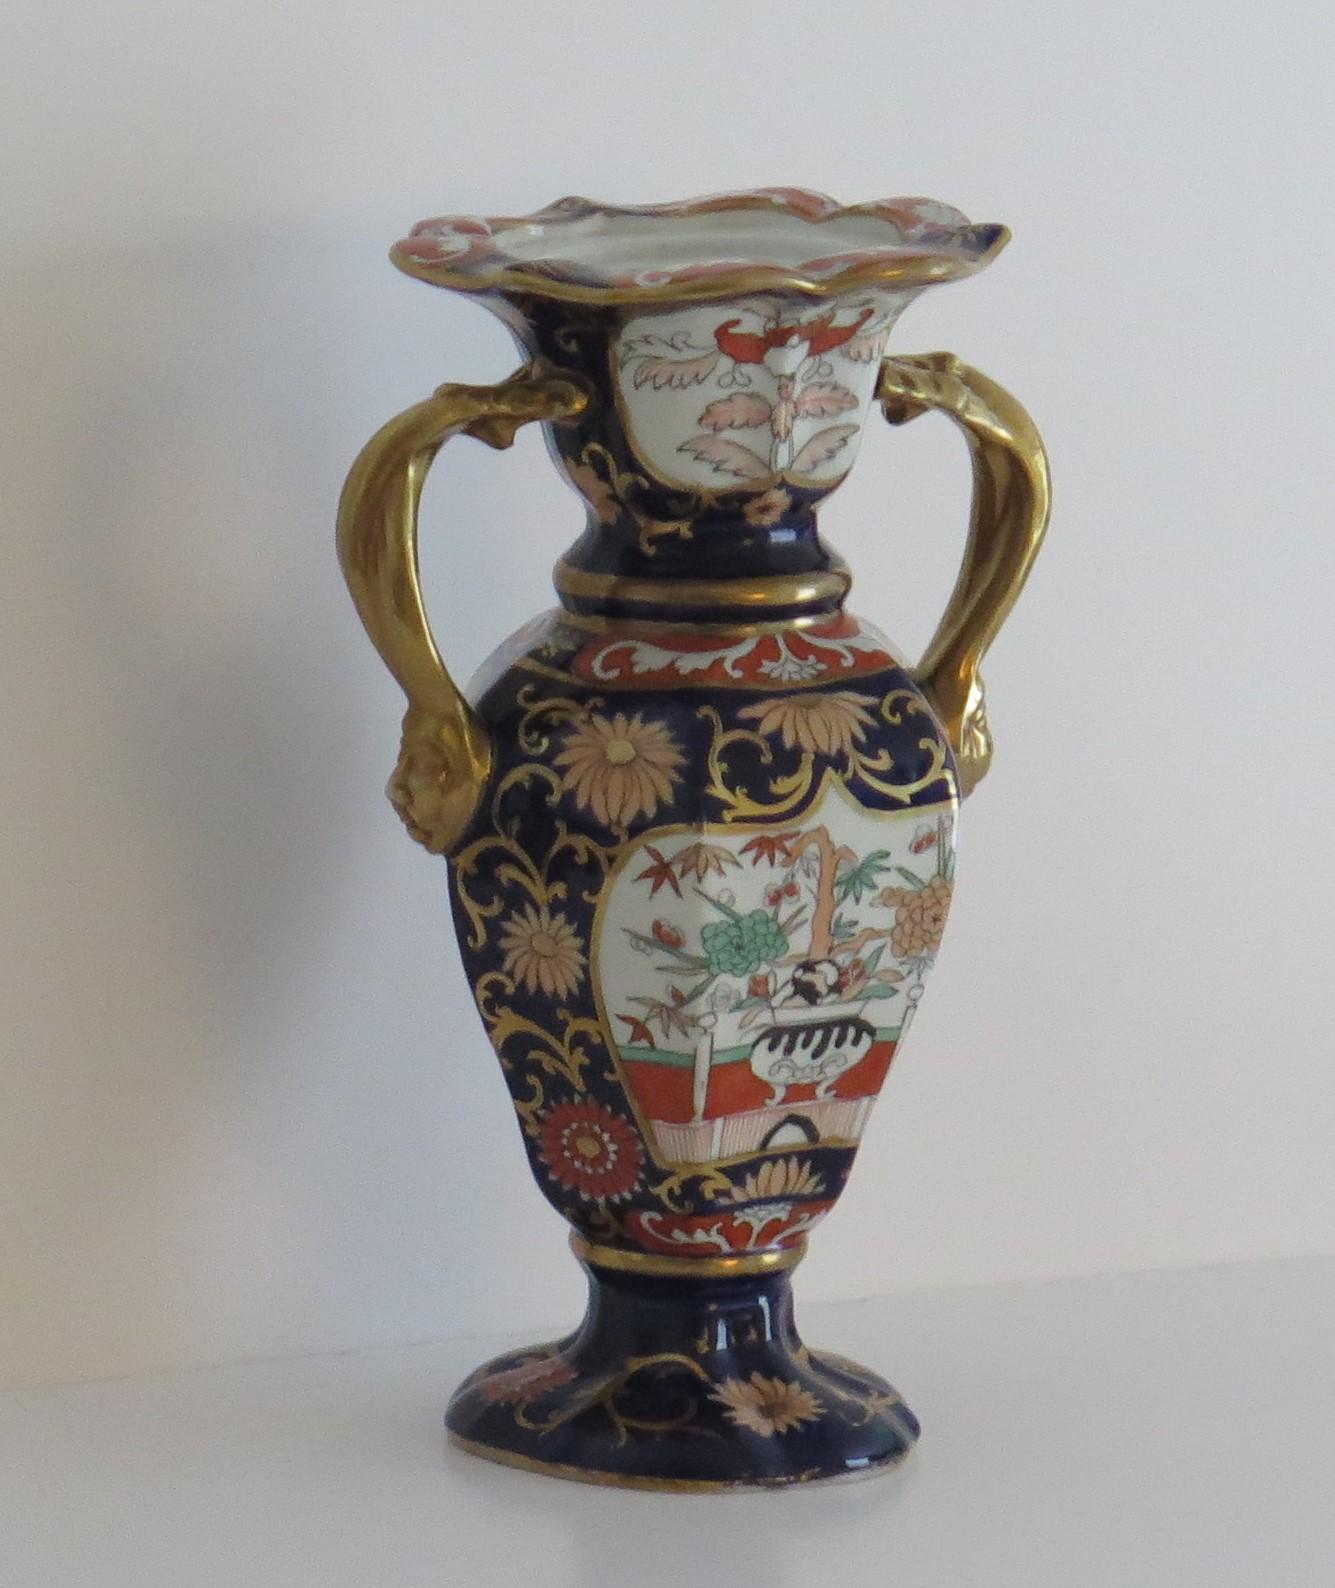 This is an ironstone tall Vase in the blue Hawthorne and fence and bowl pattern, made by Mason's Ironstone of Lane Delph, Staffordshire, England, during the first half of the 19th century, circa 1825-1835.

The vase has a fairly rare shape, with a